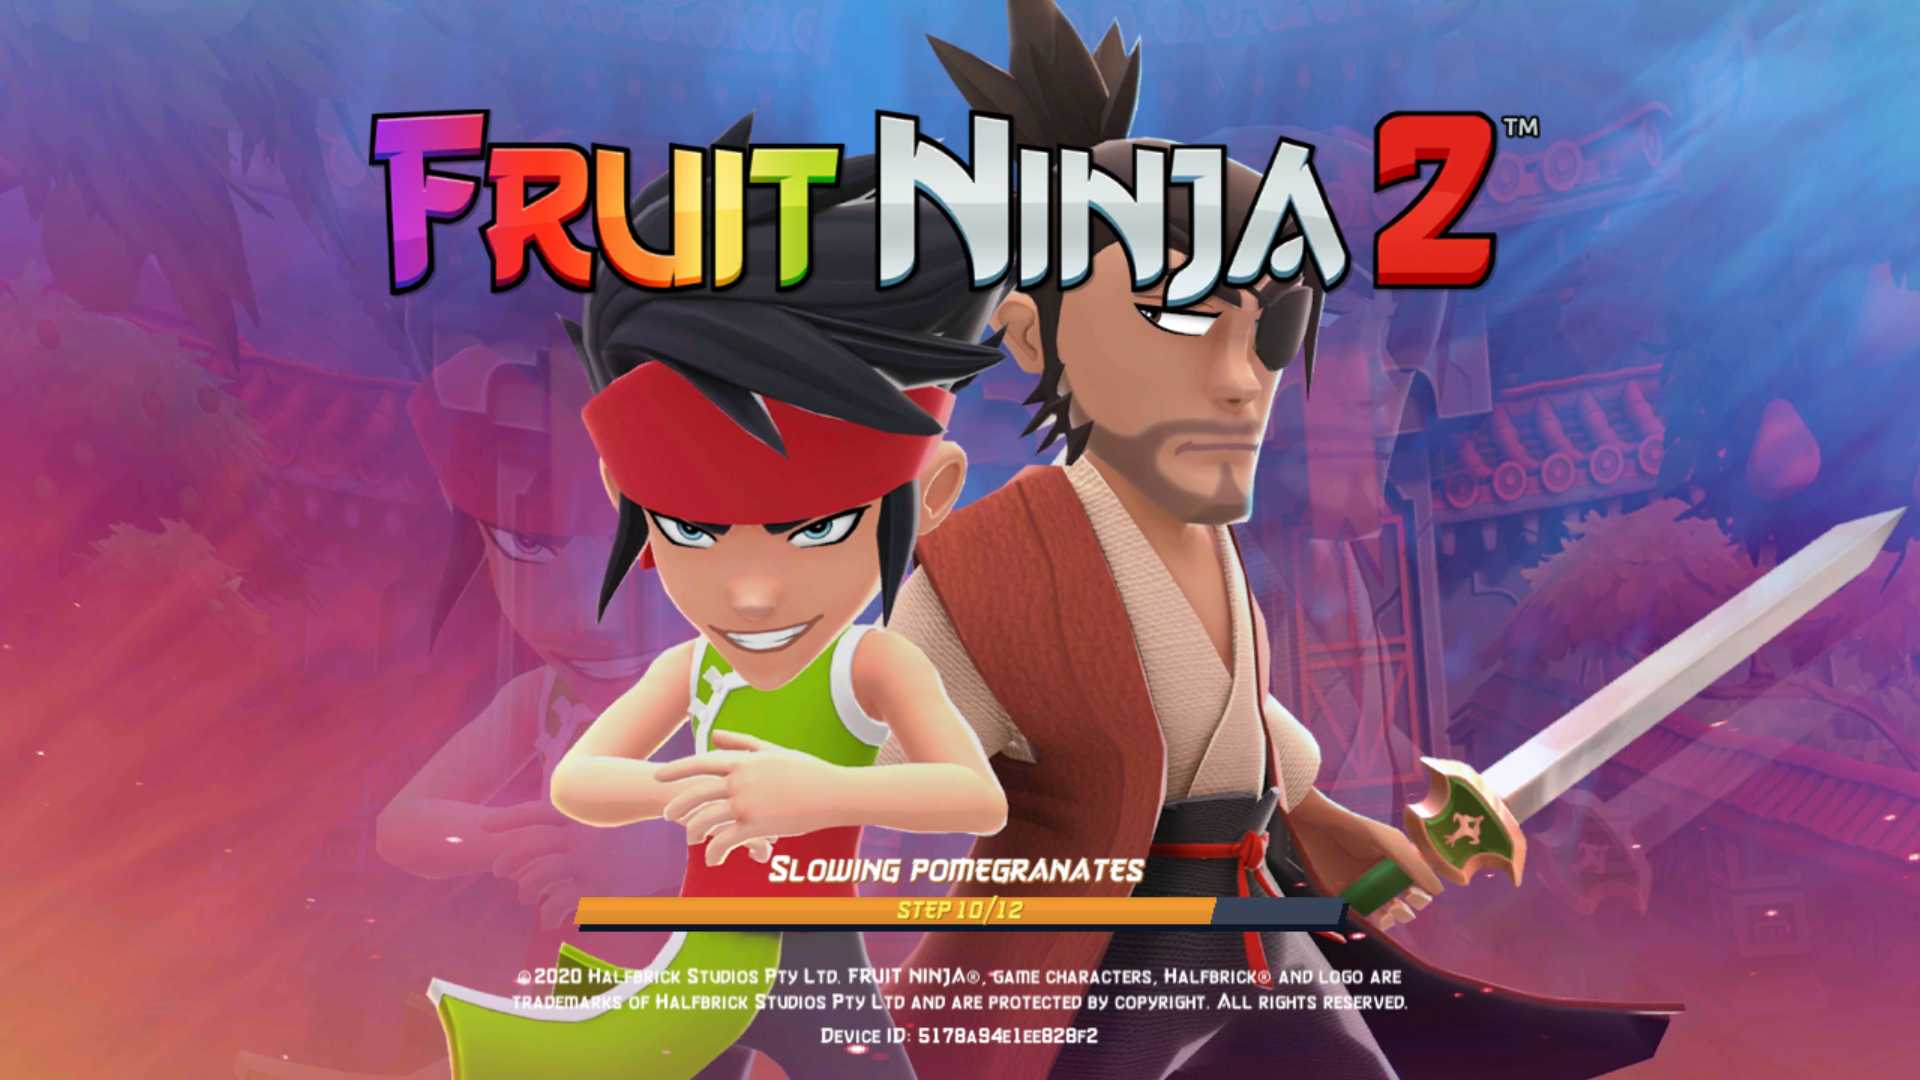 Fruit Ninja 2 is out now on iOS and Android